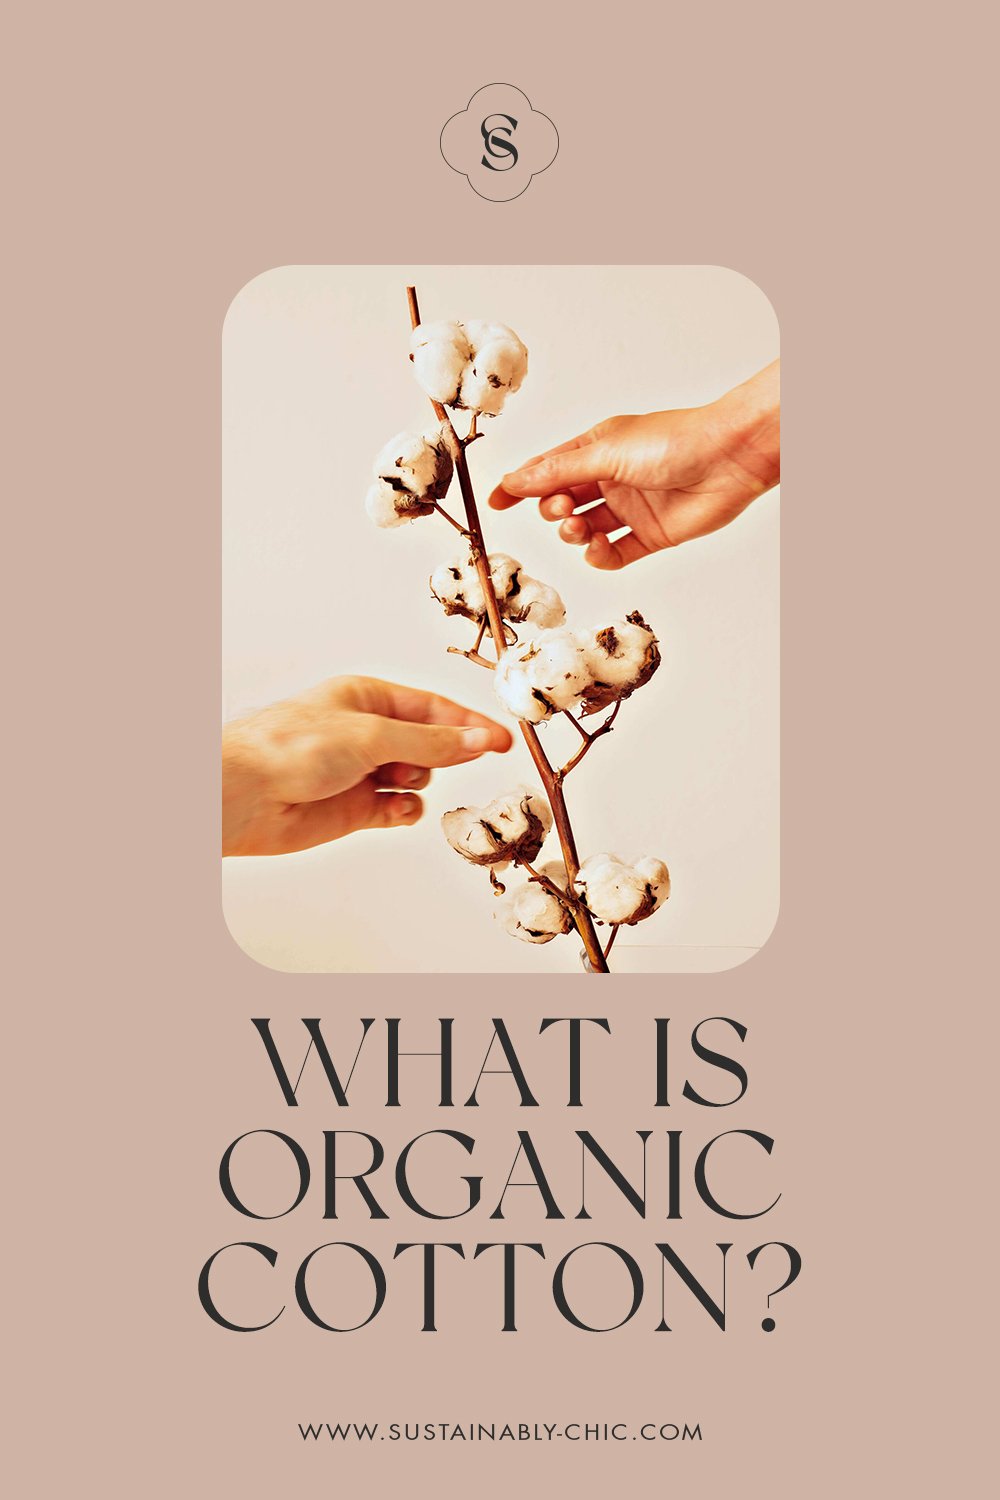 What's the Fuss About Organic Cotton? — Sustainably Chic